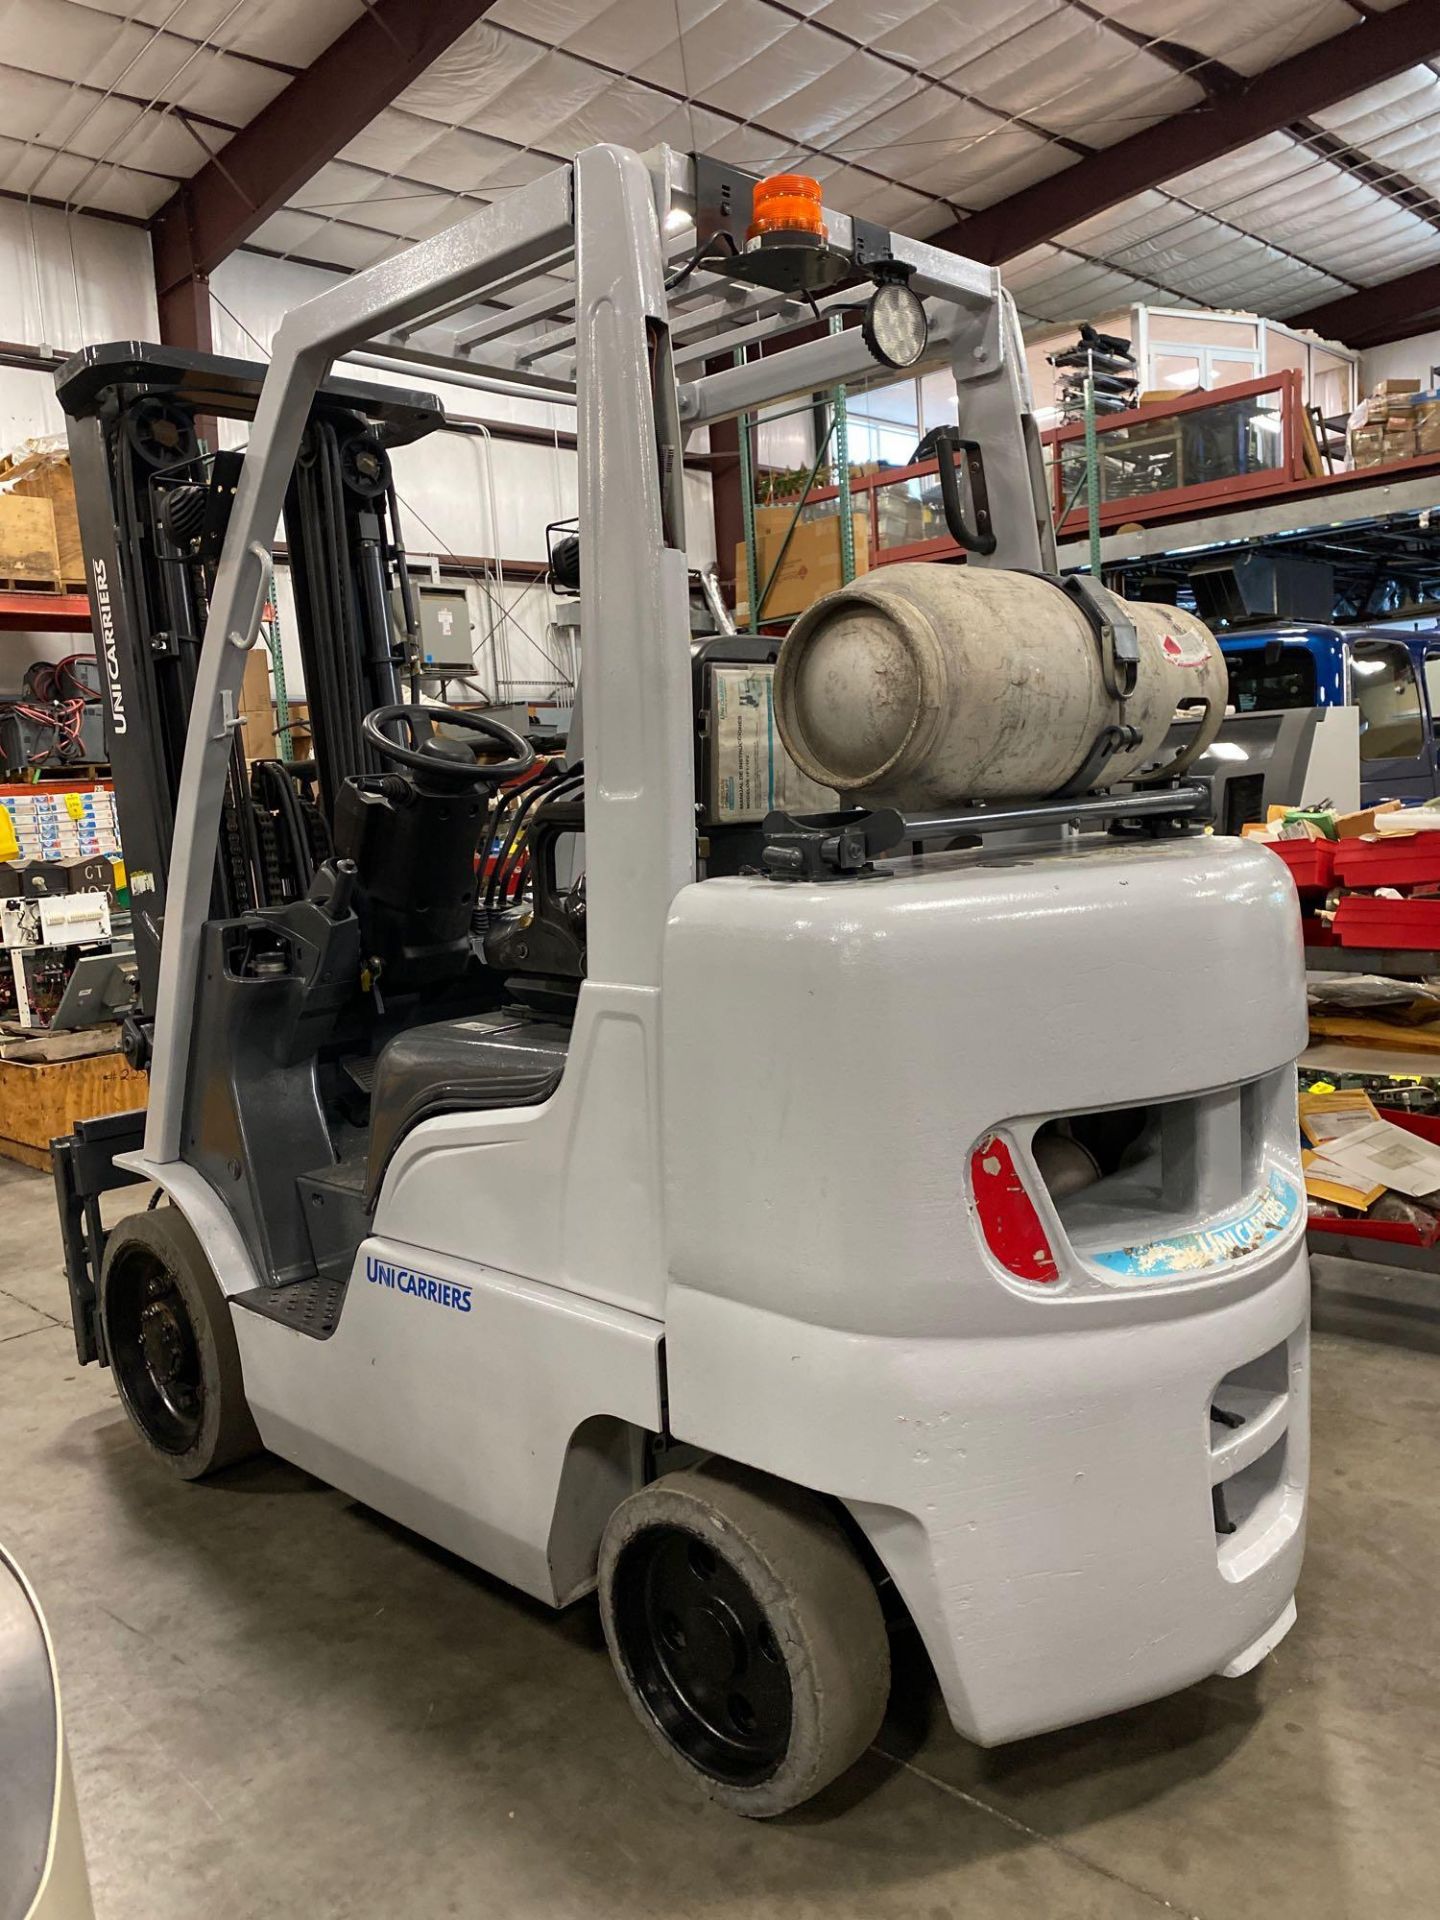 2014 UNICARRIERS LP FORKLIFT MODEL MCUG1F2F30LV, APPROX. 6,000 LB CAPACITY - Image 3 of 10